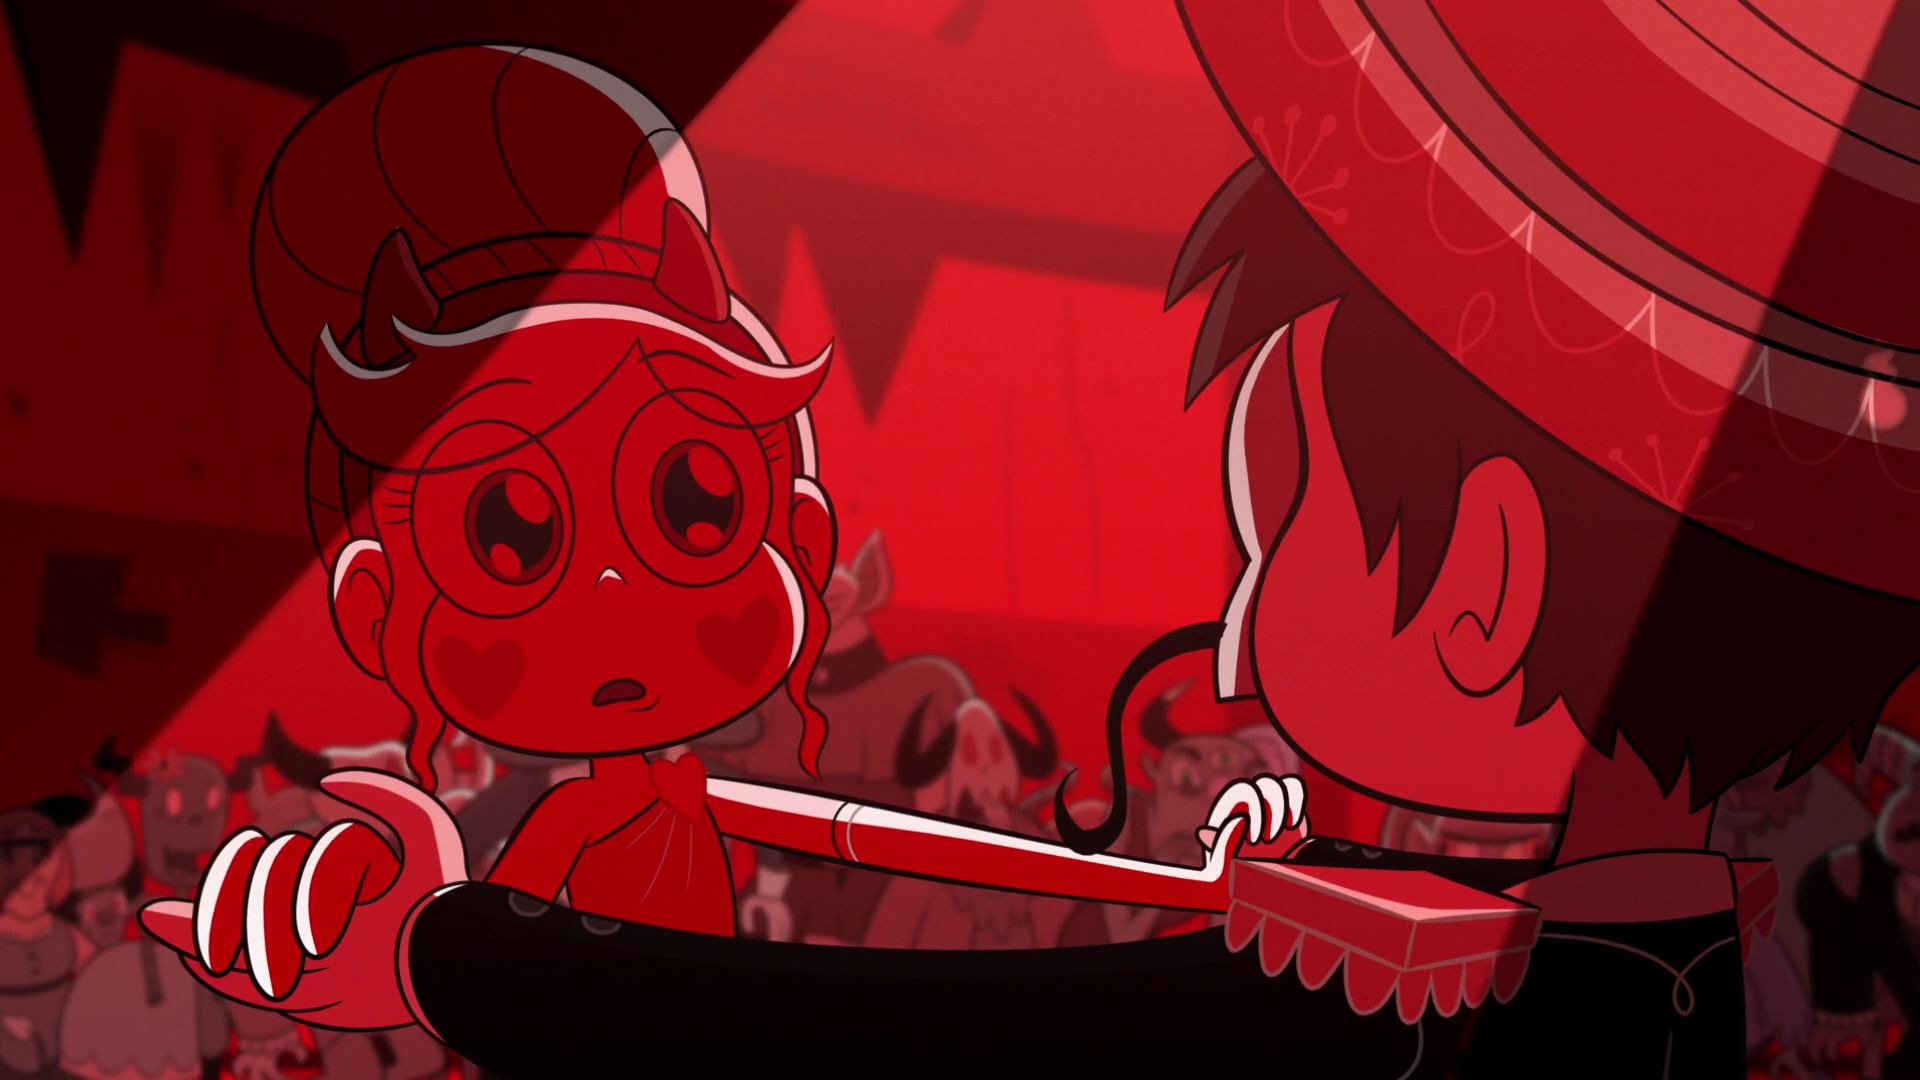 Star Vs. the Forces of Evil Wallpapers Blood Moon Ball.